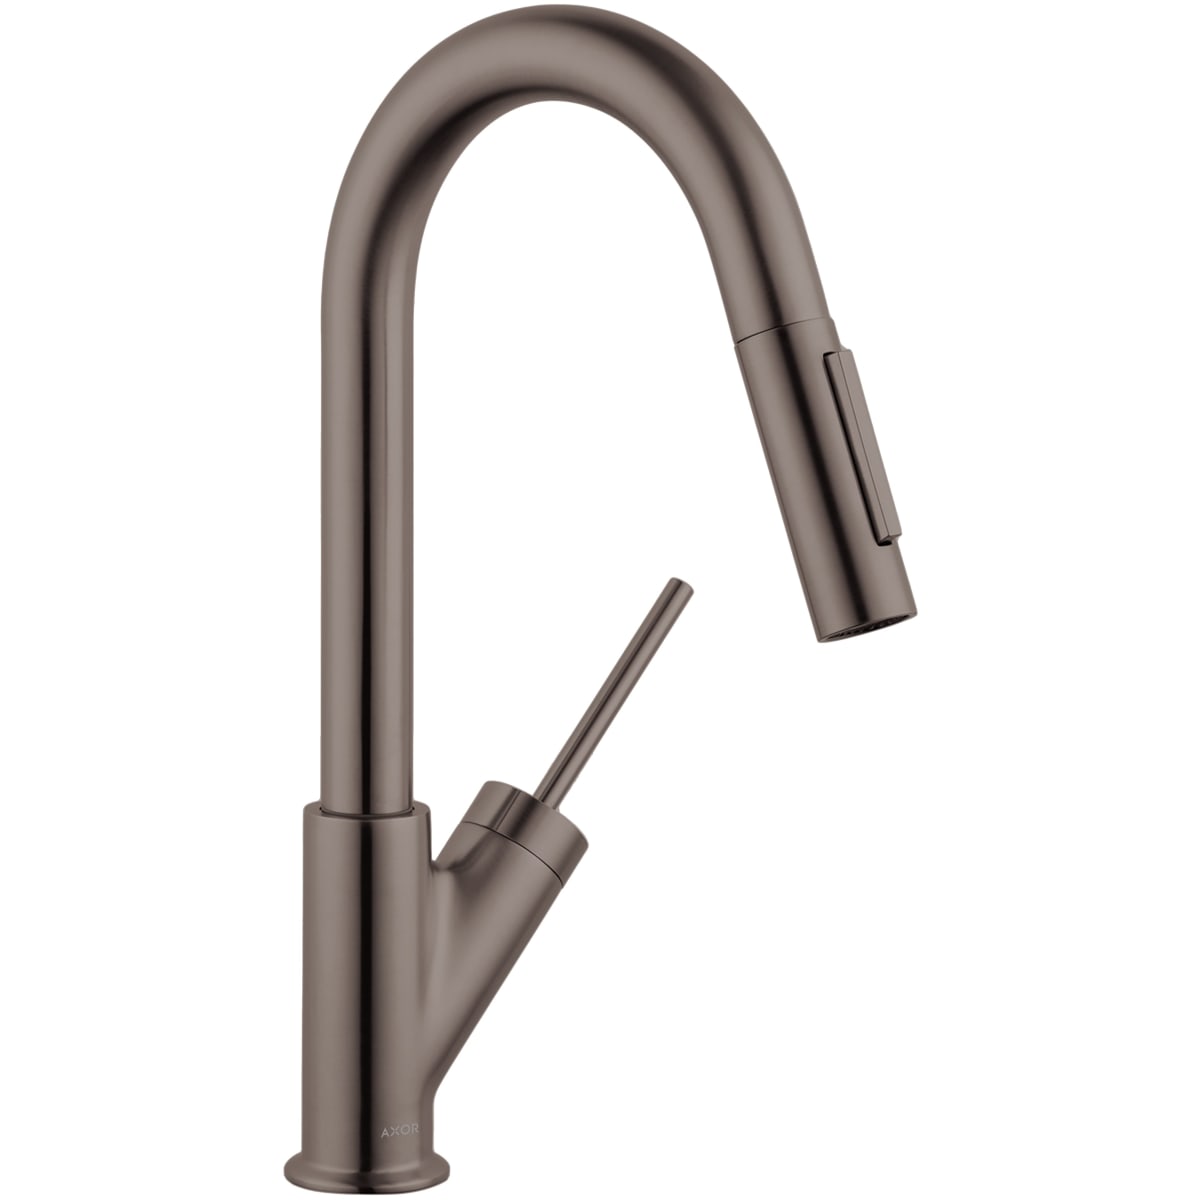 Axor 10824341 Starck Prep Pull-Down Kitchen Faucet with